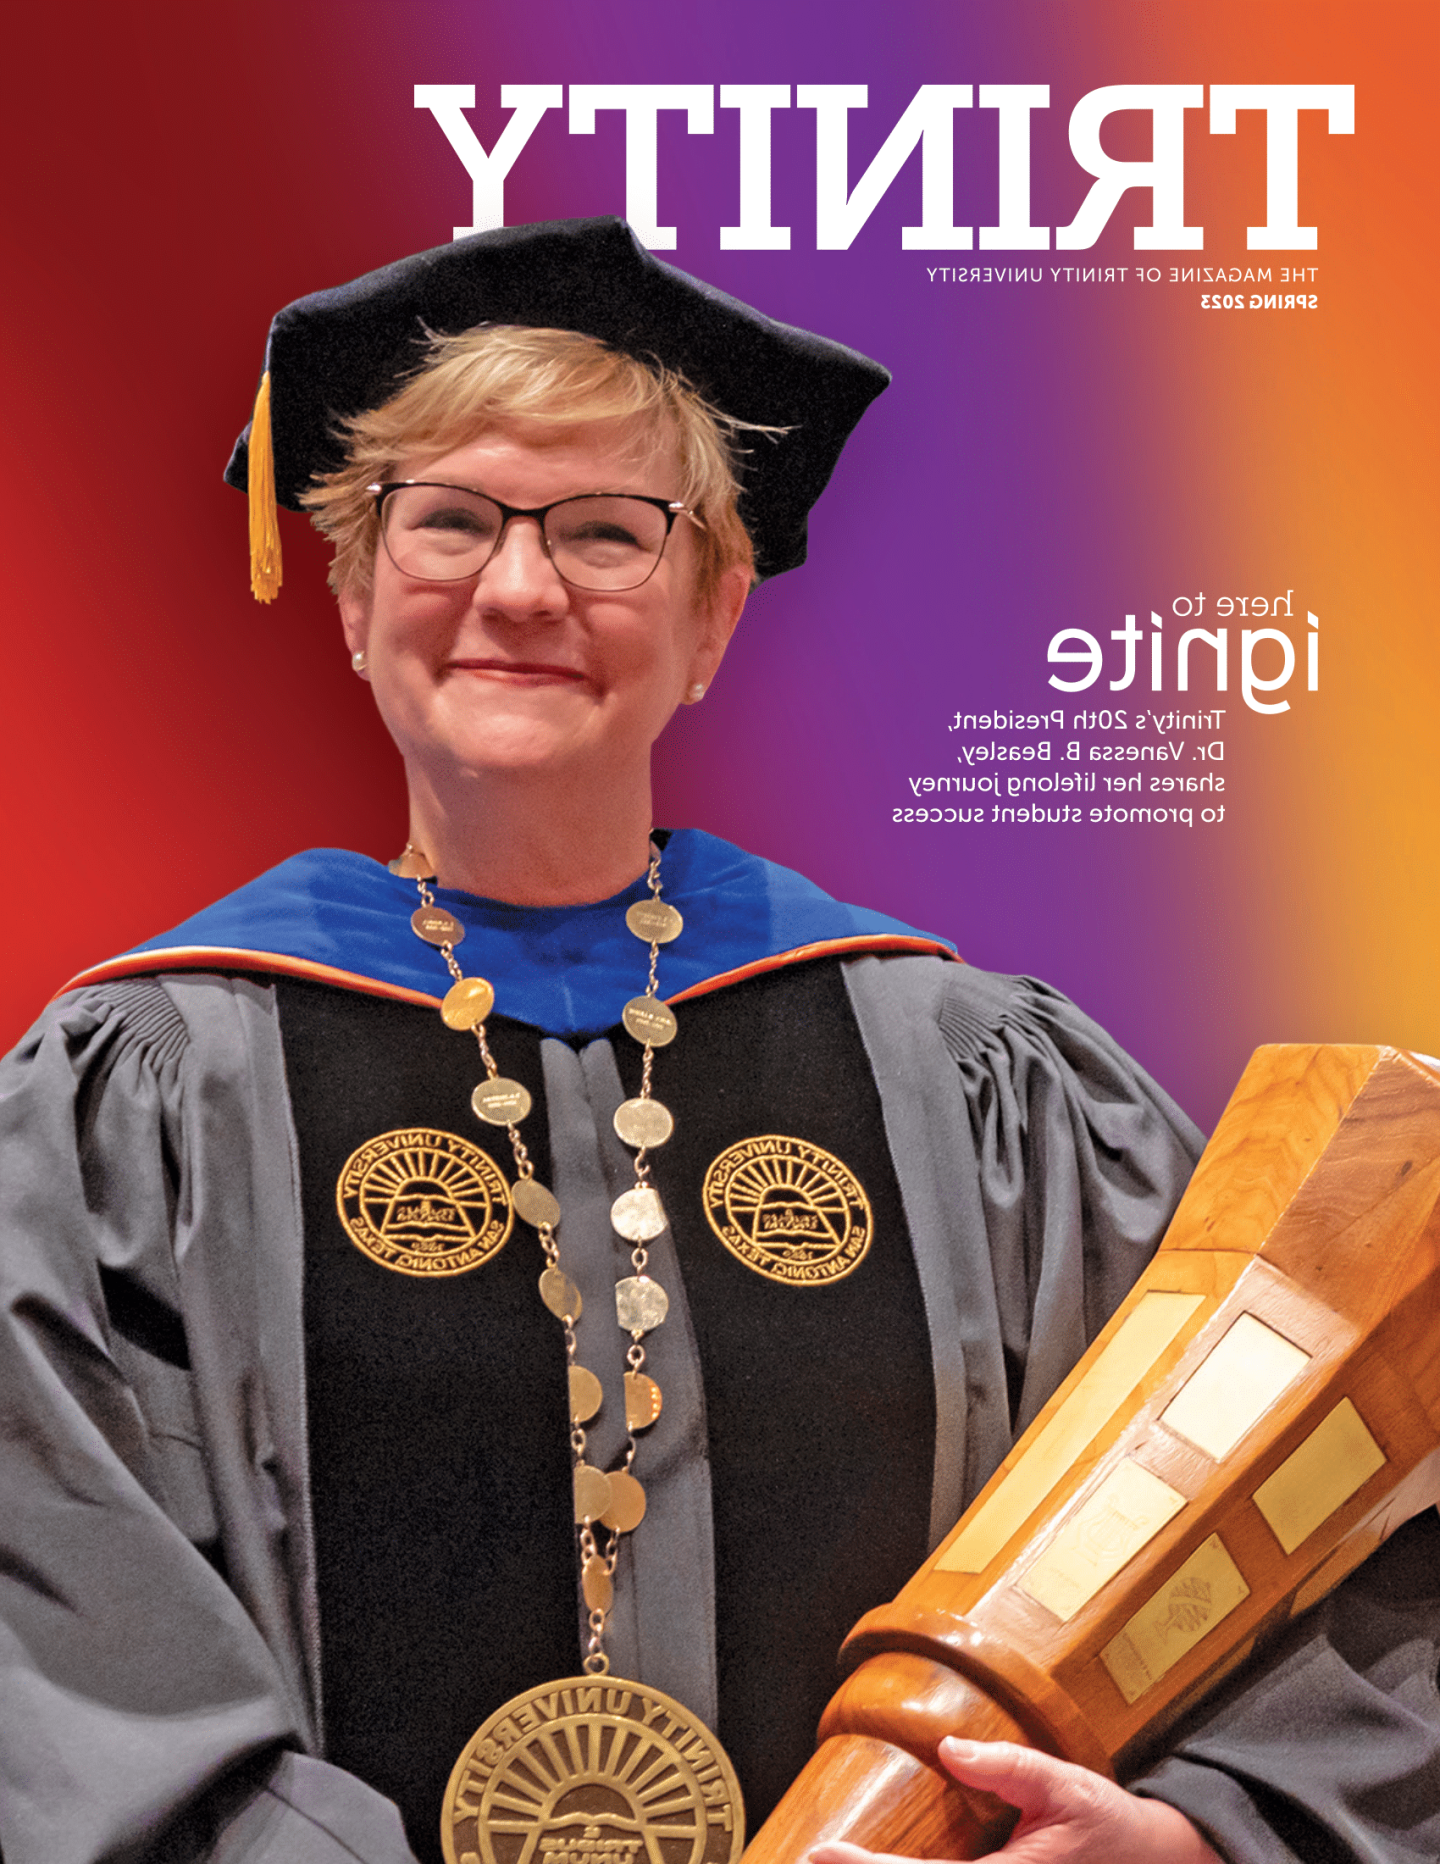 the cover of 赌博娱乐平台网址大全 magazine 2023年春季; A portrait of Vanessa Beasley holding the presidential mace in full regalia in front of a colorful gradient